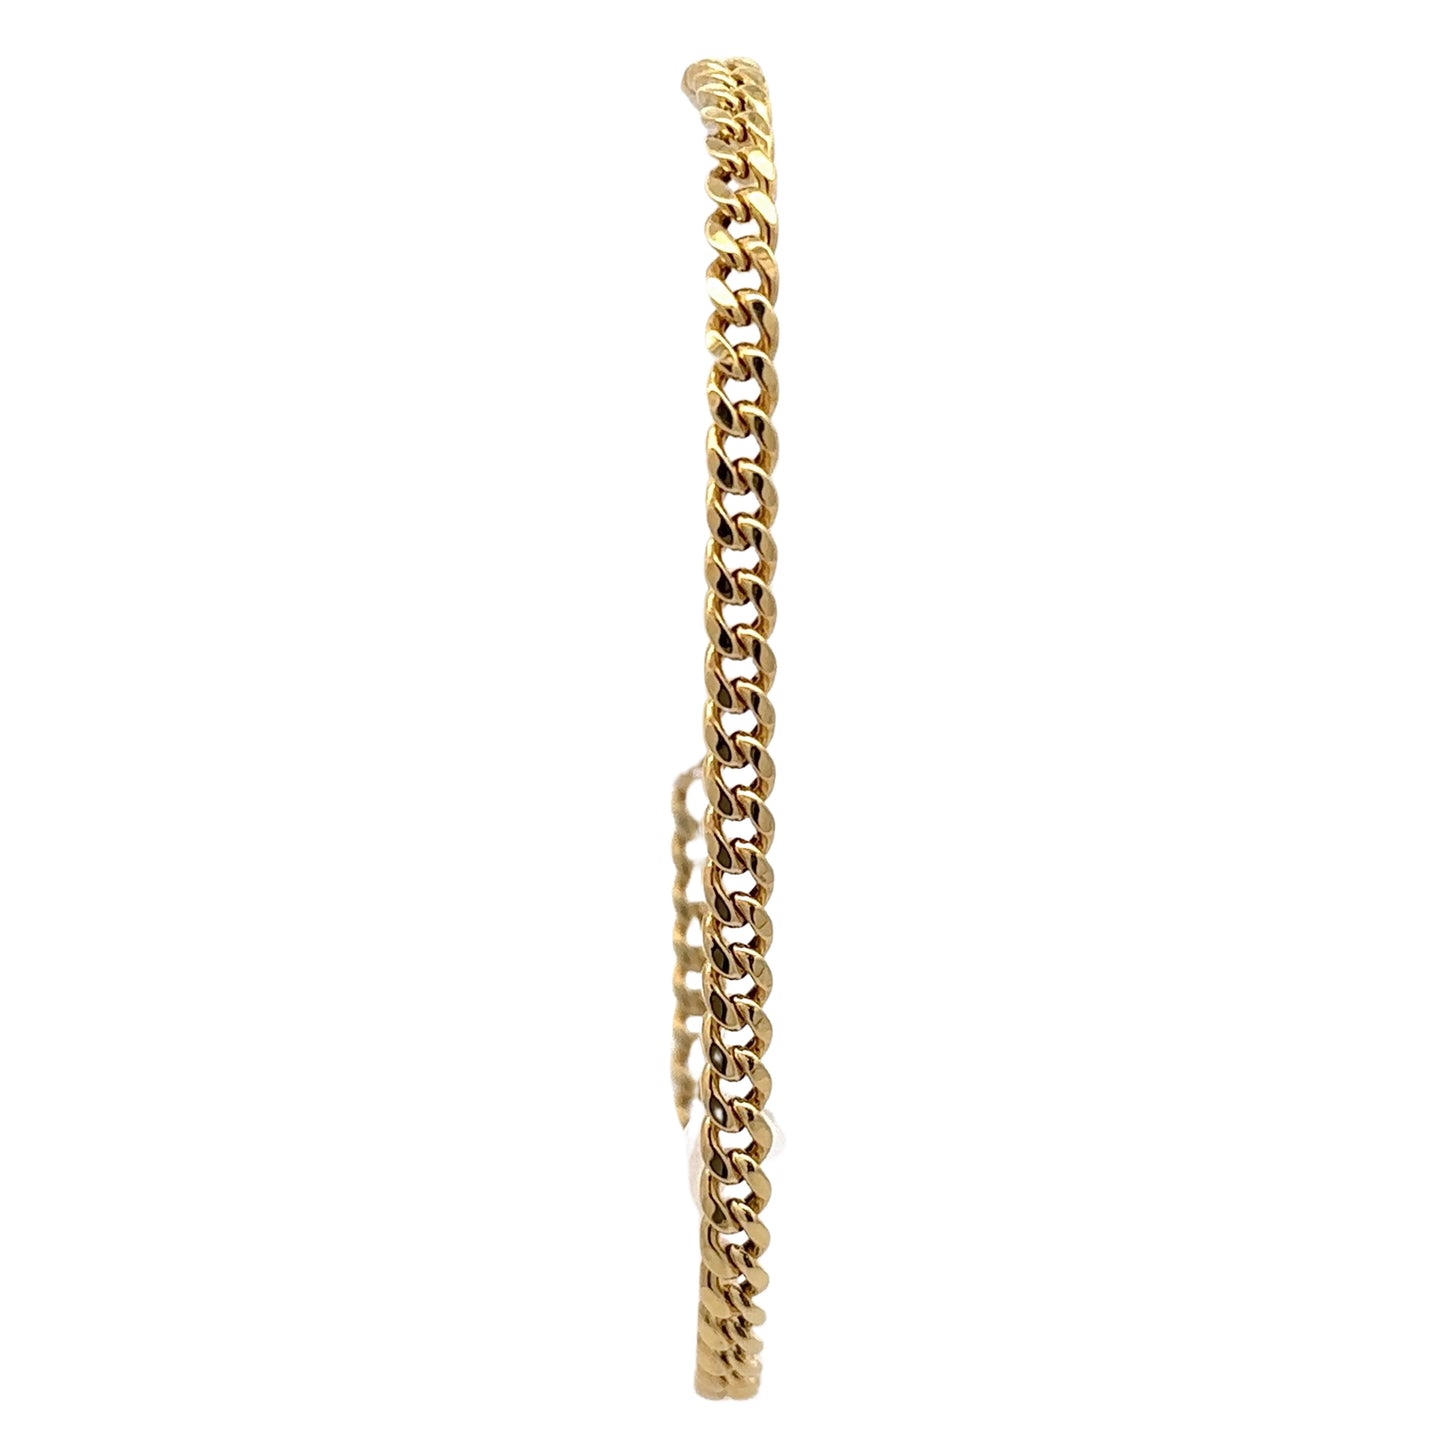 Front of yellow gold curb link bracelet